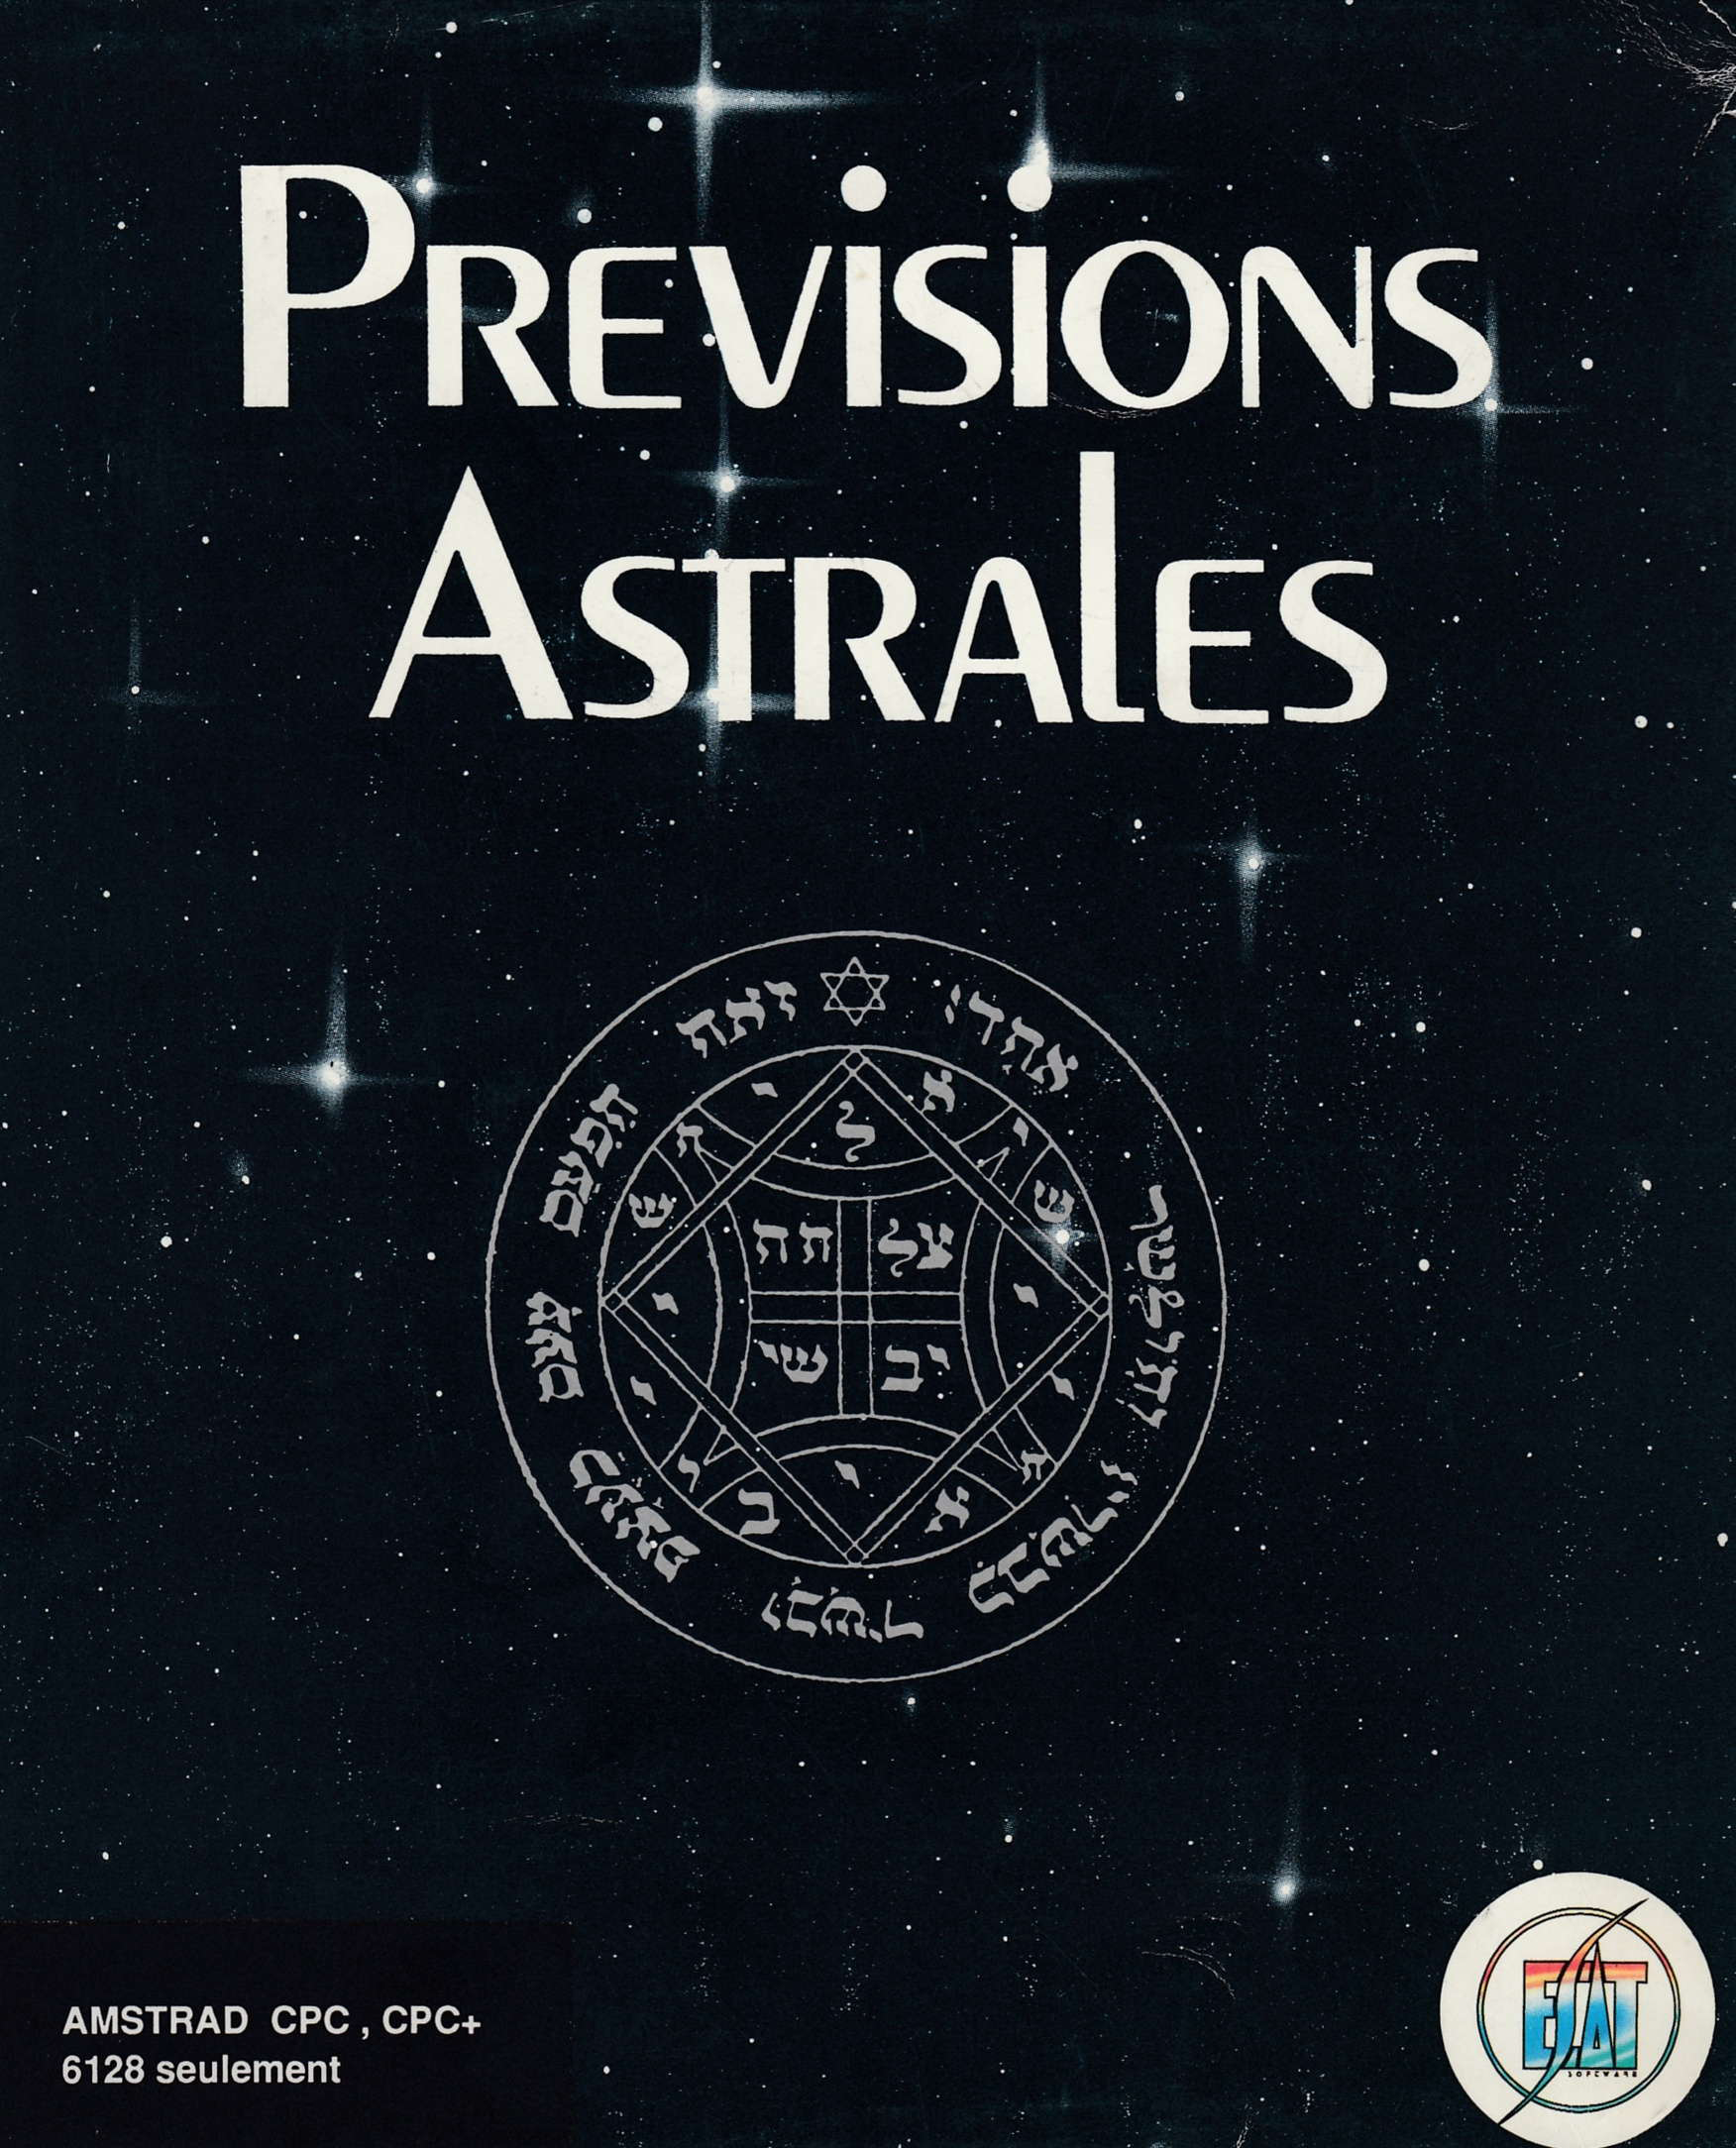 cover of the Amstrad CPC game Previsions Astrales  by GameBase CPC